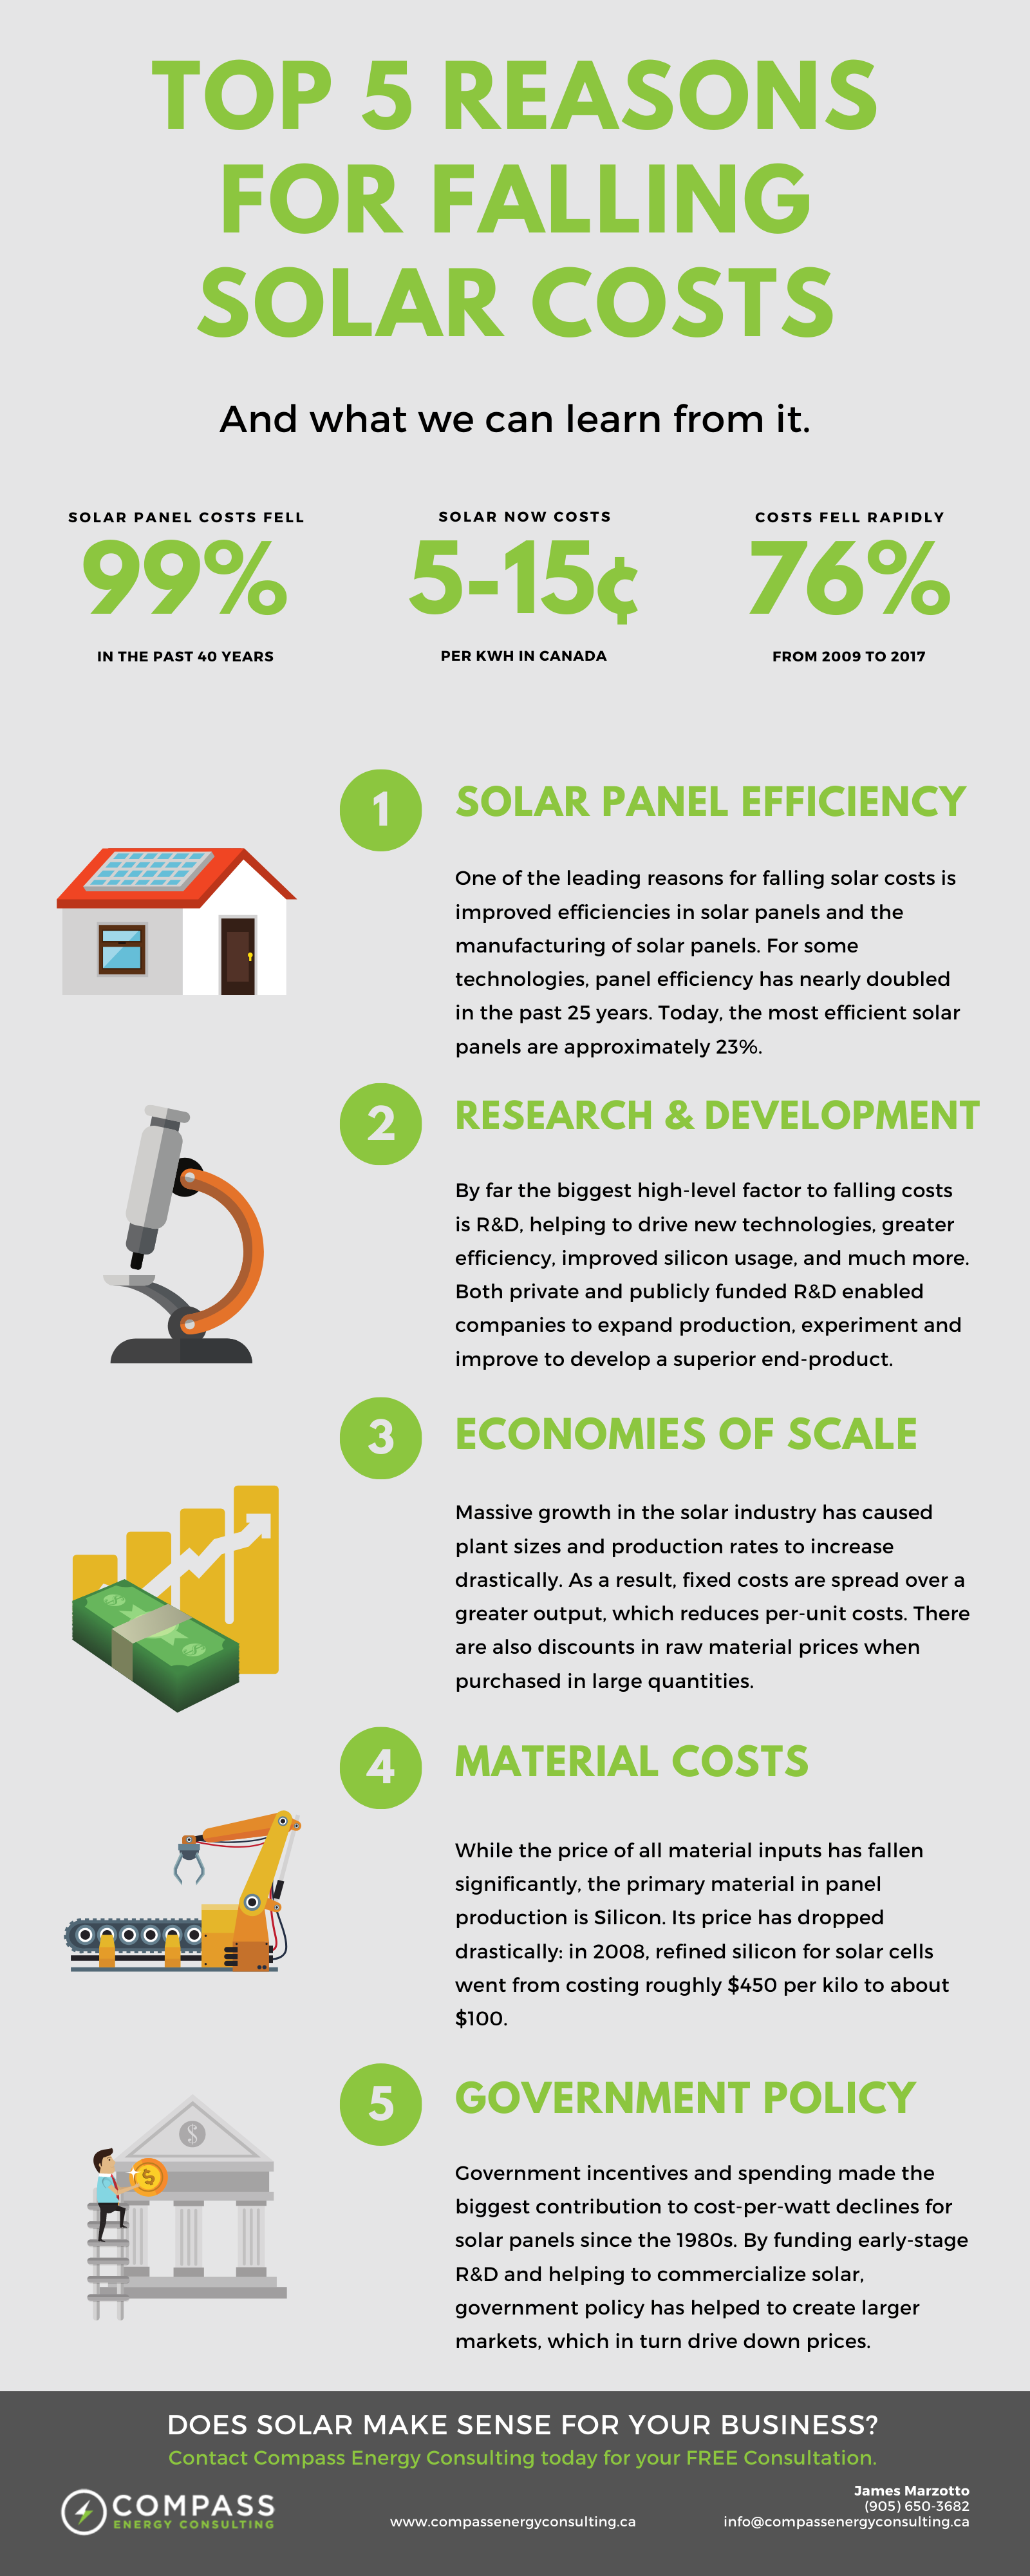 Compass Energy Consulting - Top 5 Reasons For Falling Solar Costs